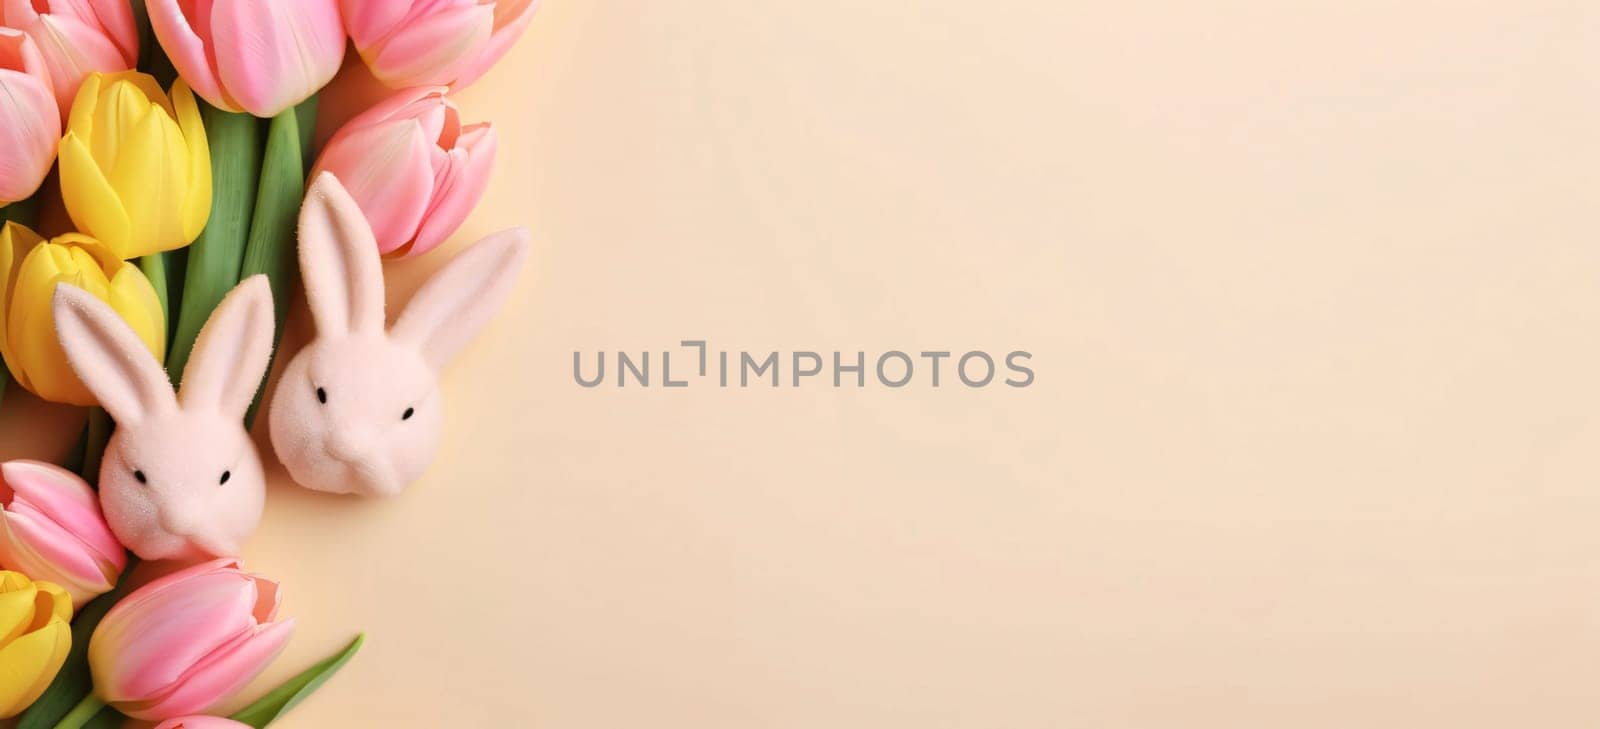 Easter rabbit: Bunny and tulips on pastel beige background with copy space